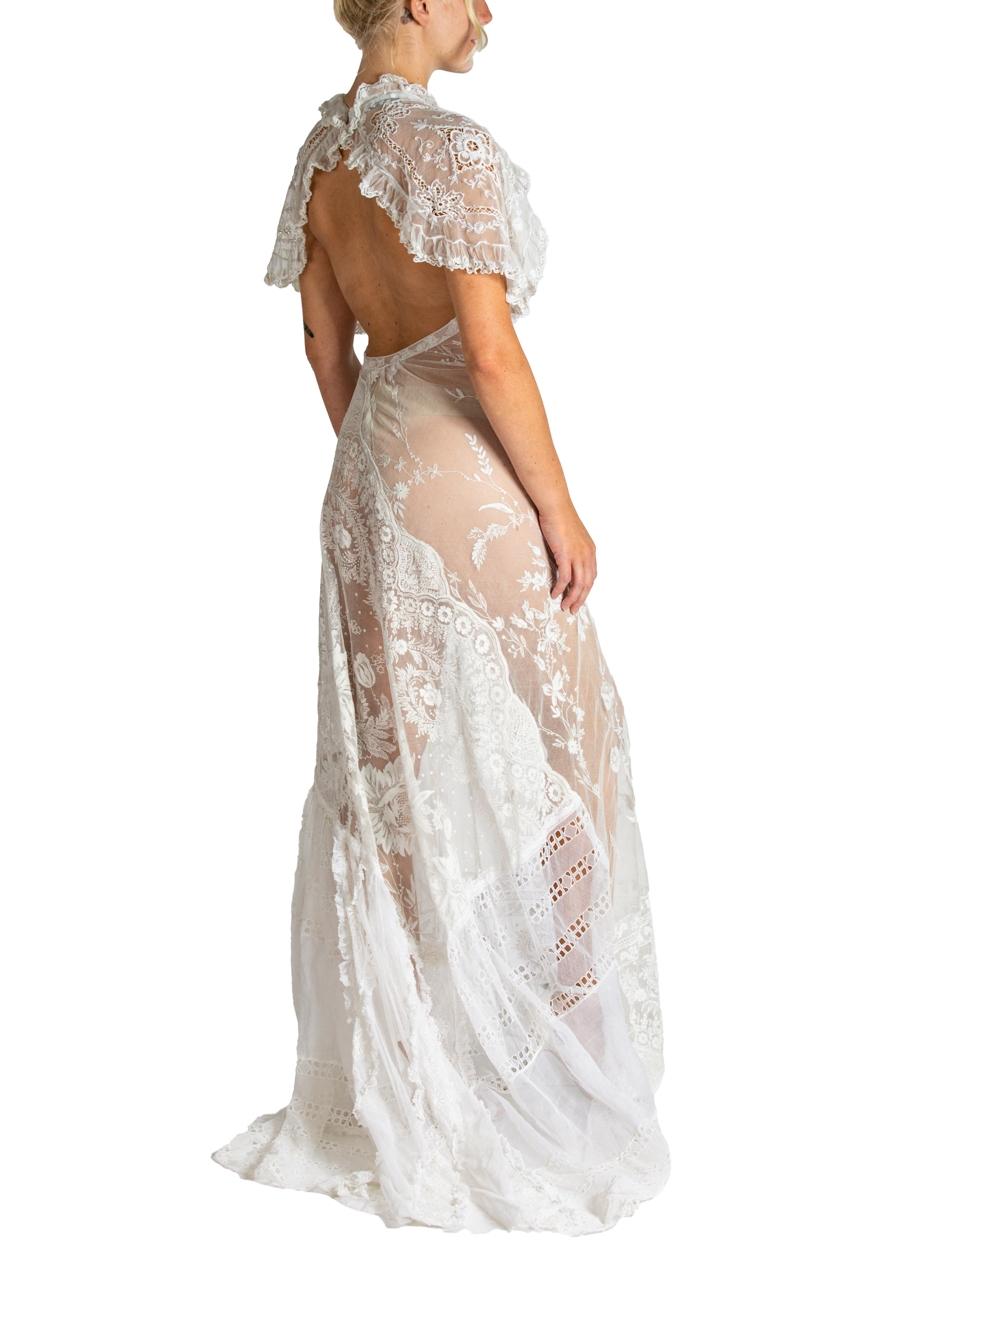 MORPHEW ATELIER White Cotton Embroidered Antique Net Lace Gown With Cut-Out Back For Sale 3